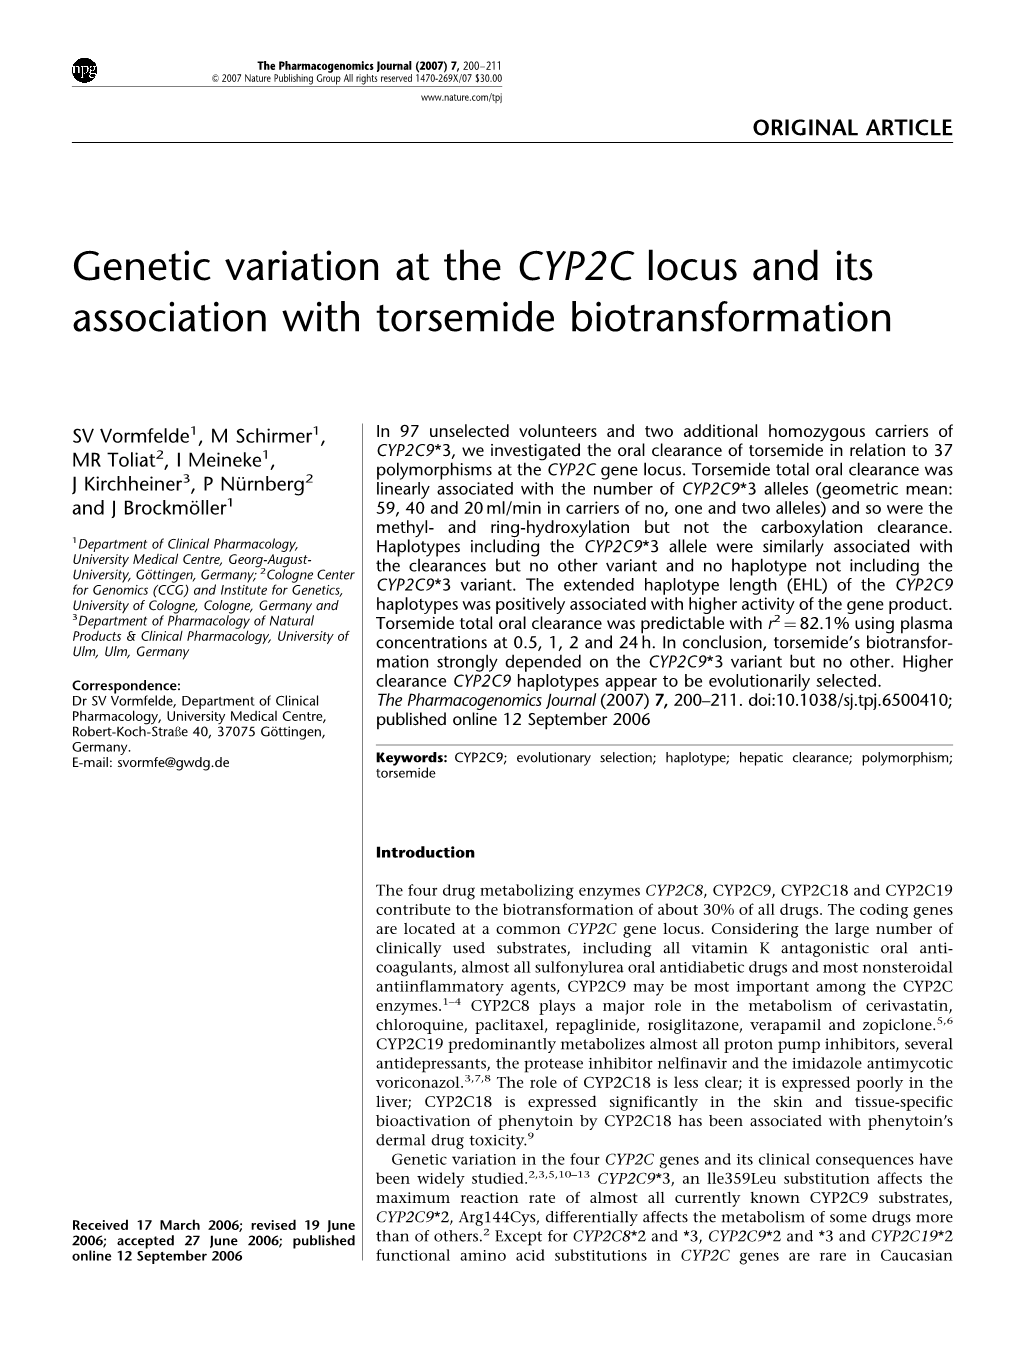 Genetic Variation at the CYP2C Locus and Its Association with Torsemide Biotransformation